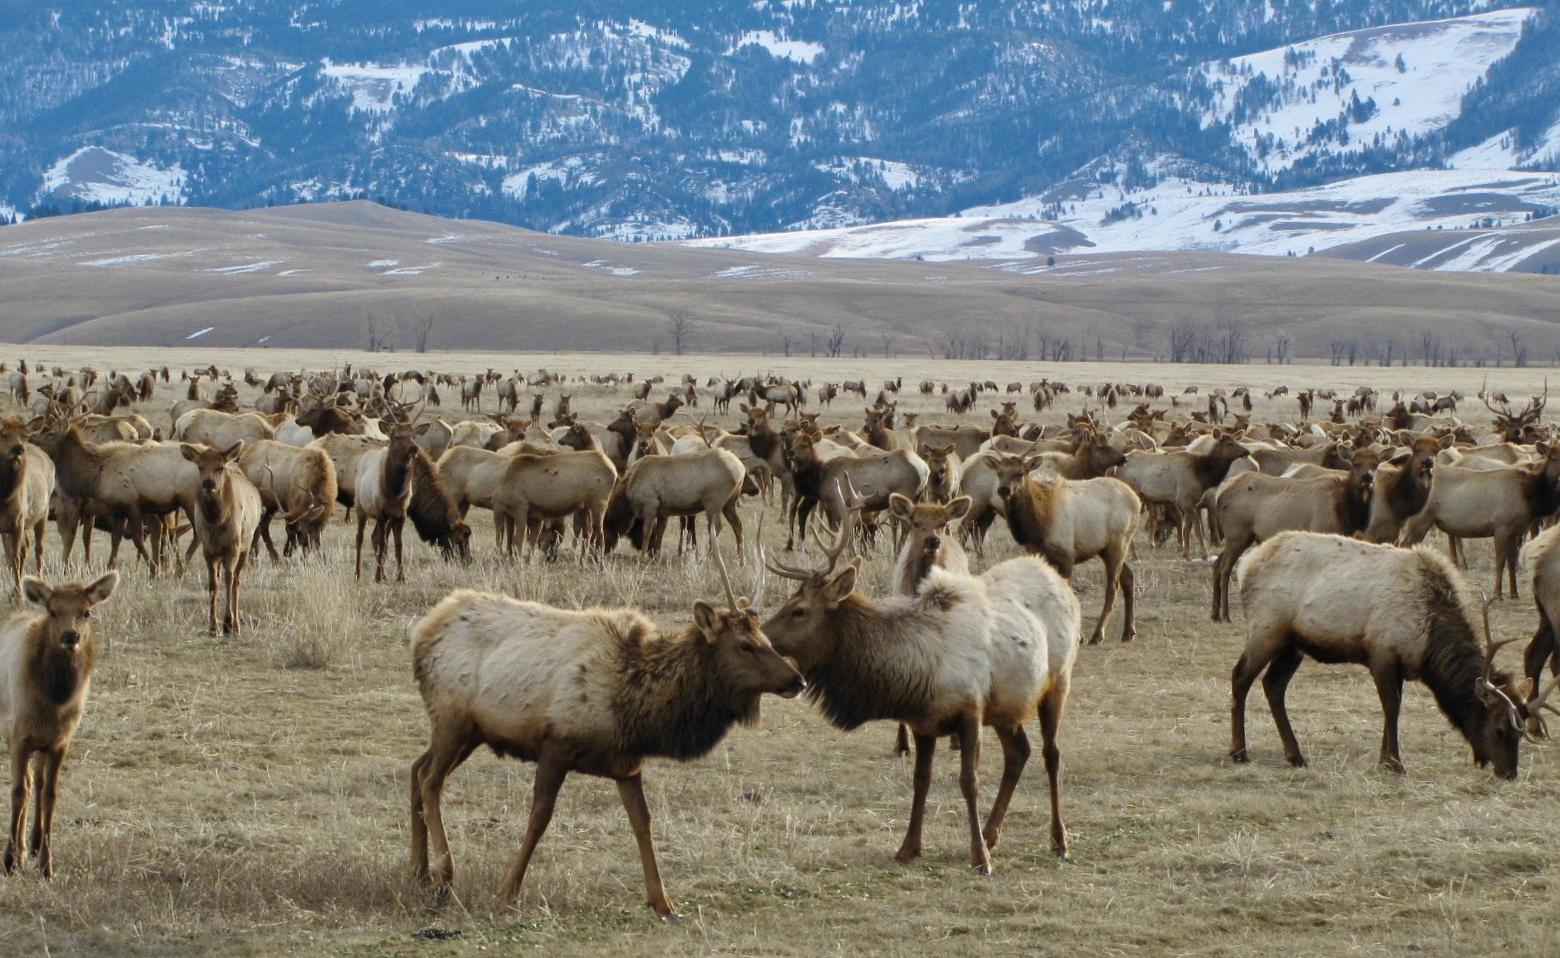 Elk that survived decimation in the Greater Yellowstone Ecosystem at the turn of the 20th century have been used as feedstock to rebuild elk herds across the West. The Jackson Hole Herd is among several famous herds in the region numbering more than 11,000 strong. On any given winter, 80 percent of those wapiti get artificial nourishment at the National Elk Refuge. Photo courtesy US Fish and Wildlife Service